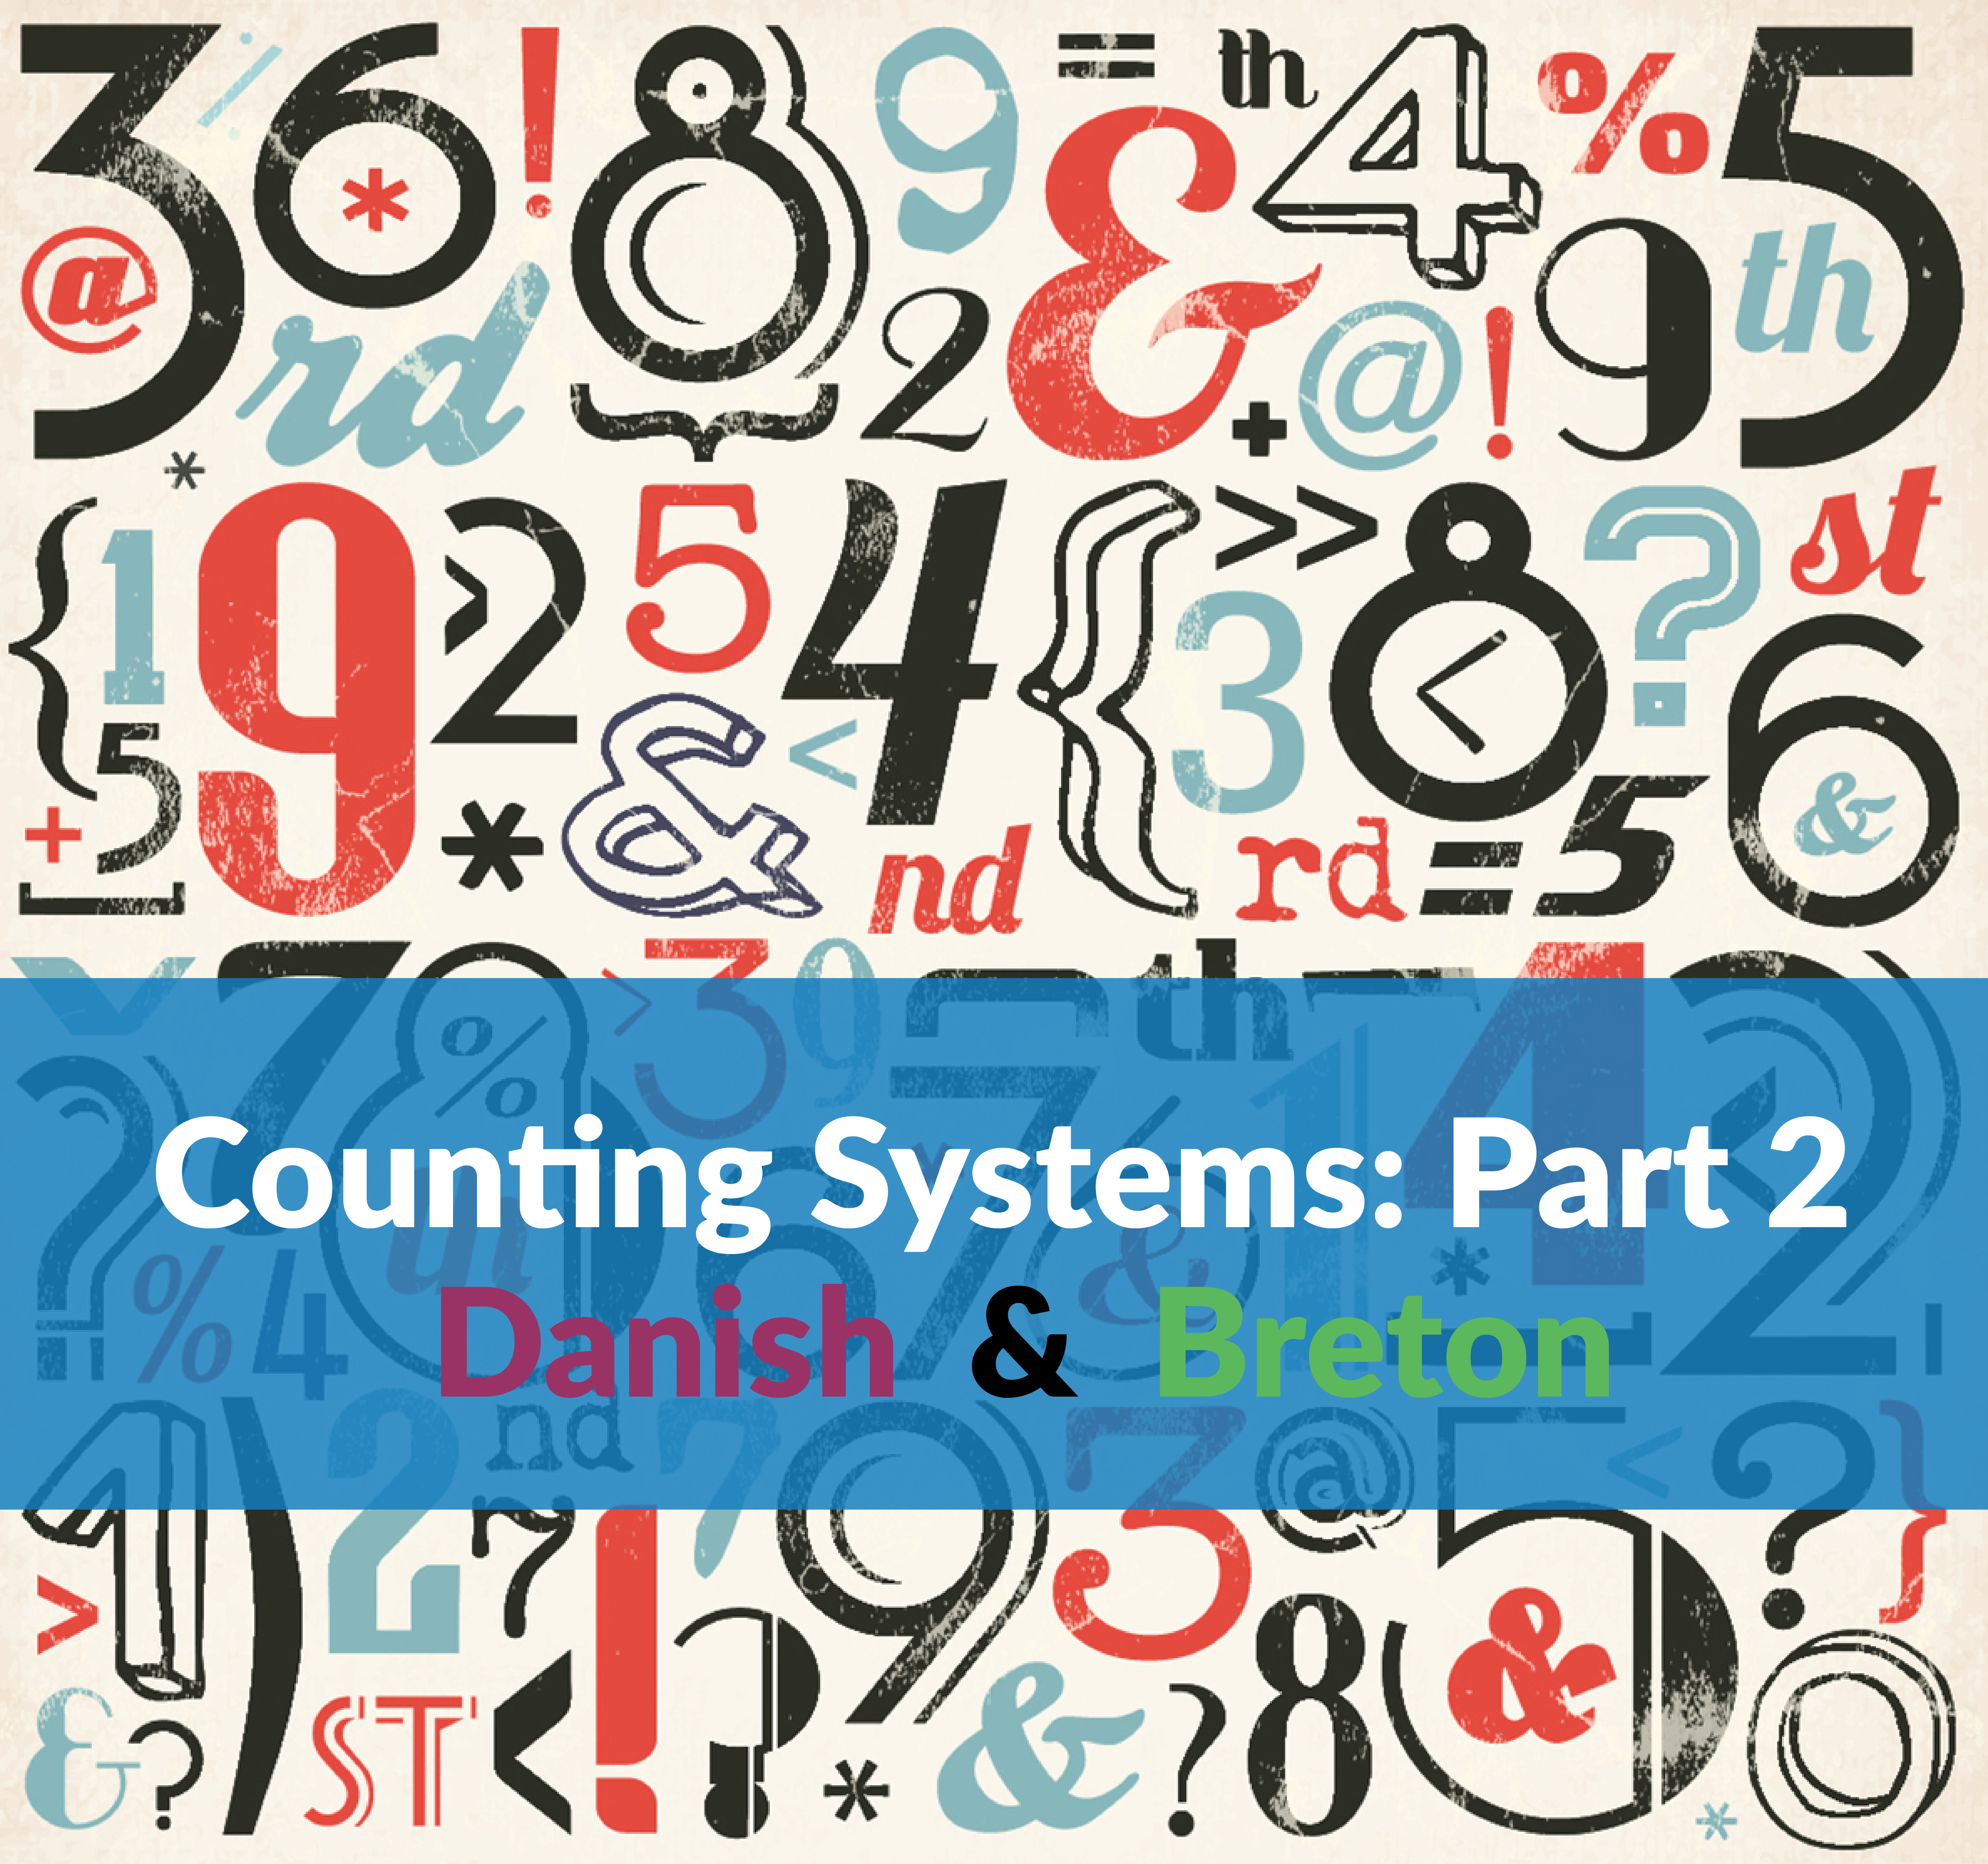 Counting systems - Part 2